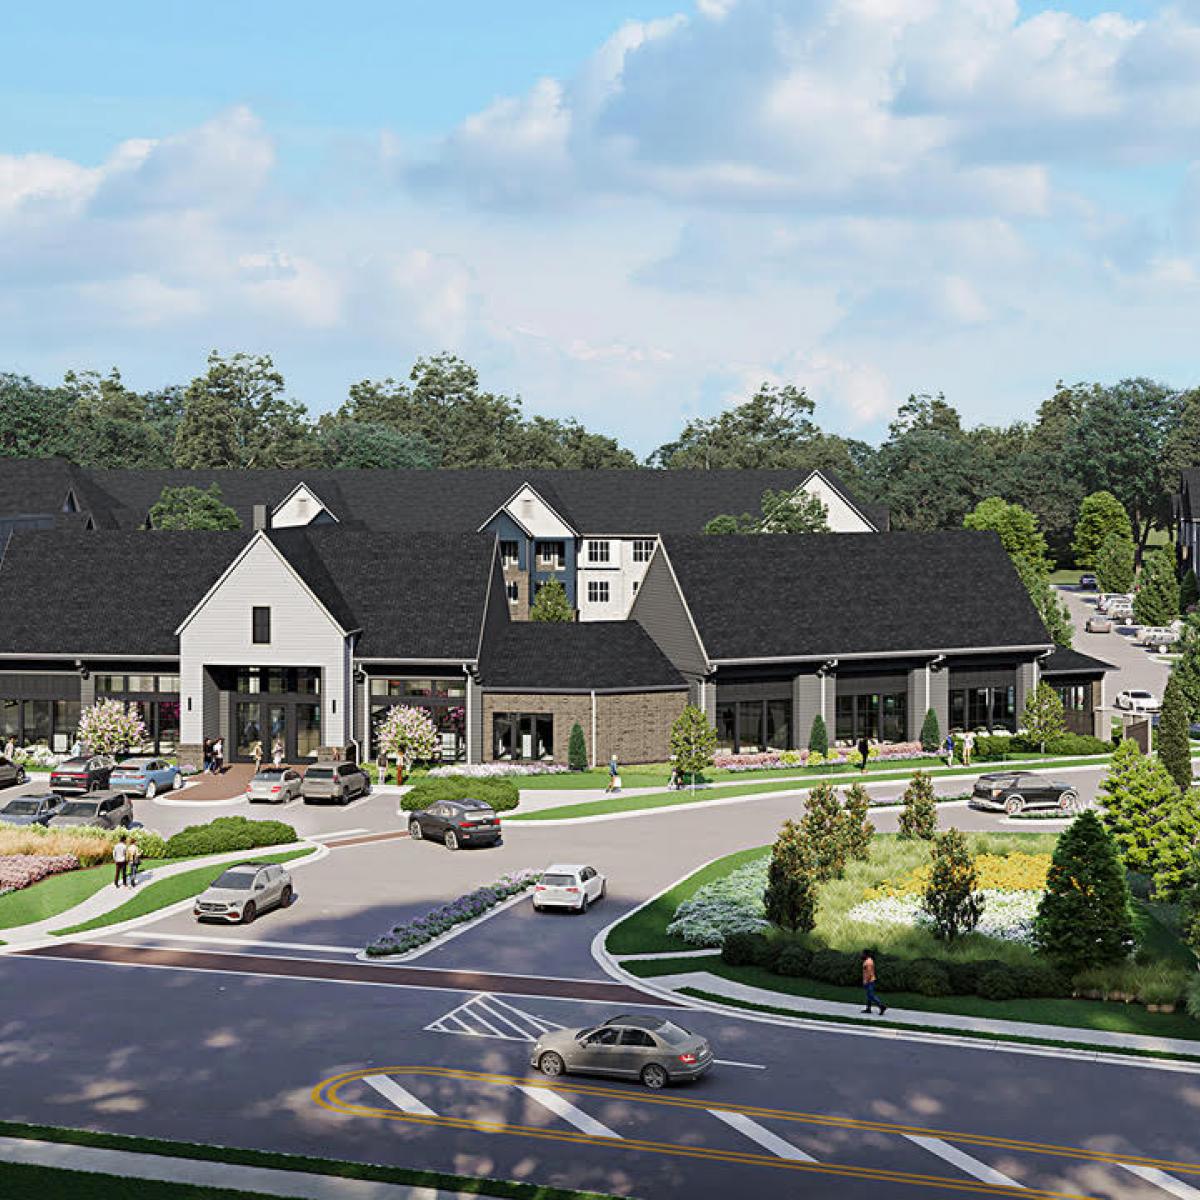 Gwinnett County's oldest country club replaced with apartment community